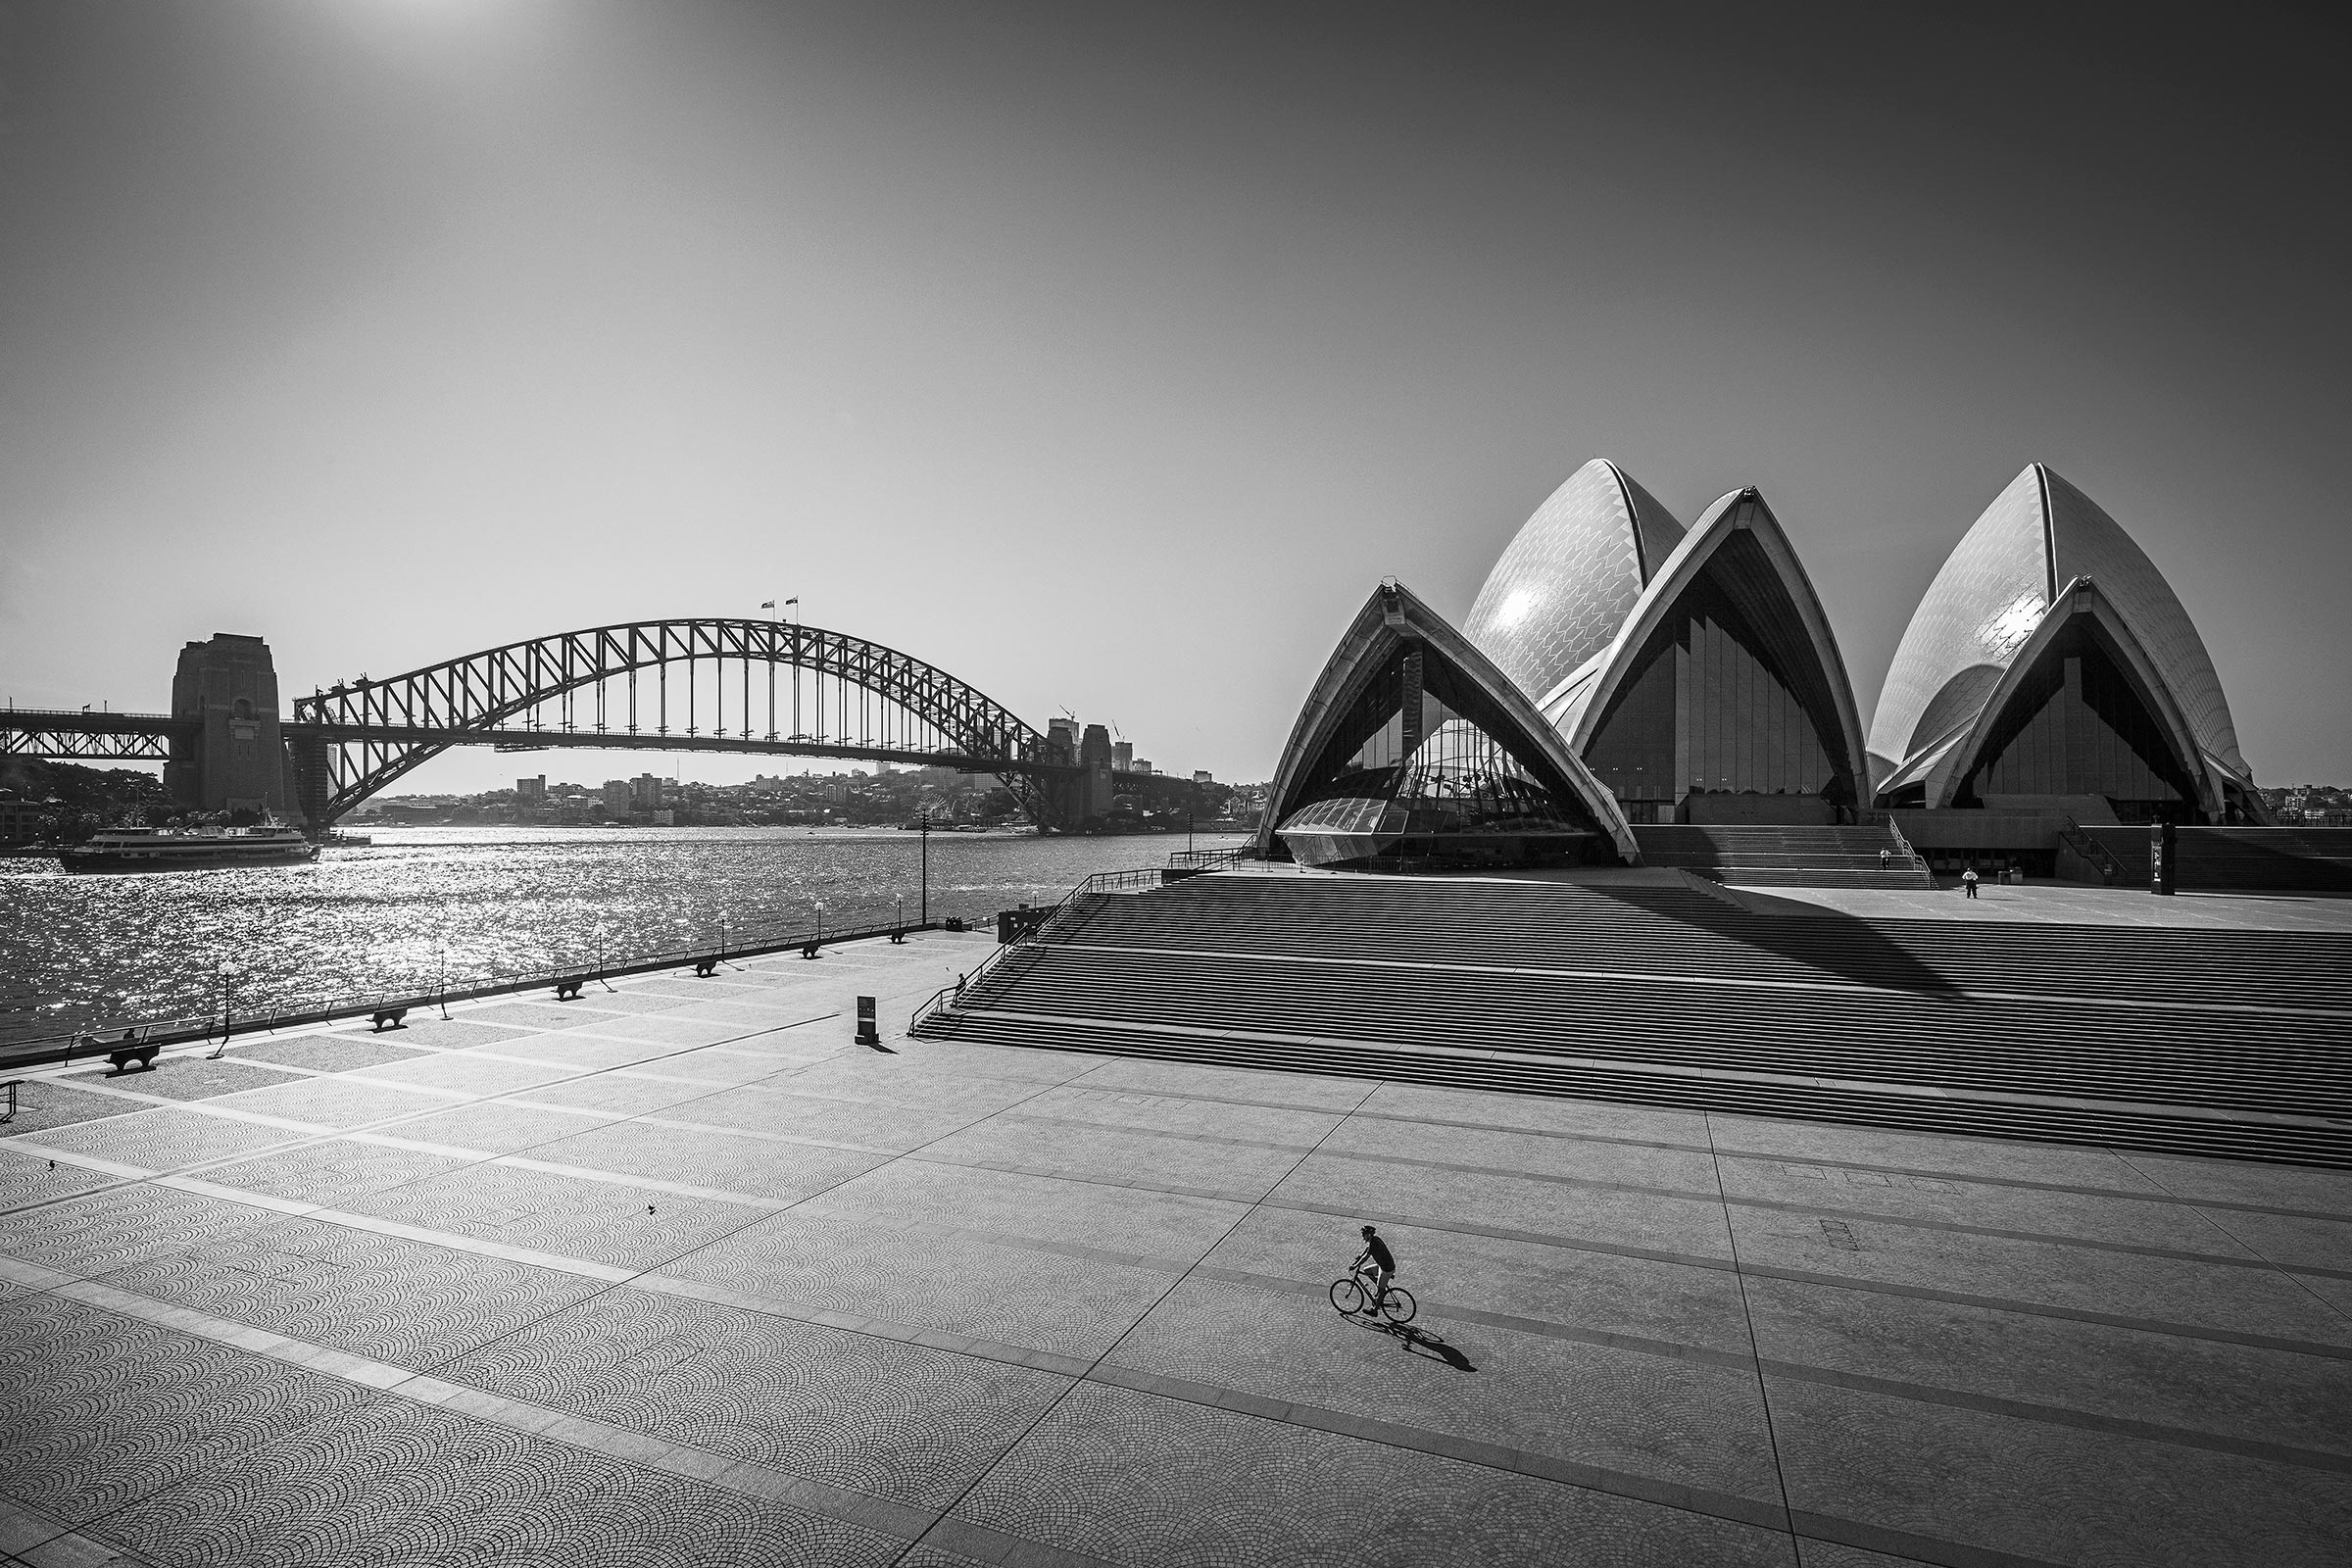 Landscape Sydney photography of empty forecourt of Sydney opera house with harbour bridge in background